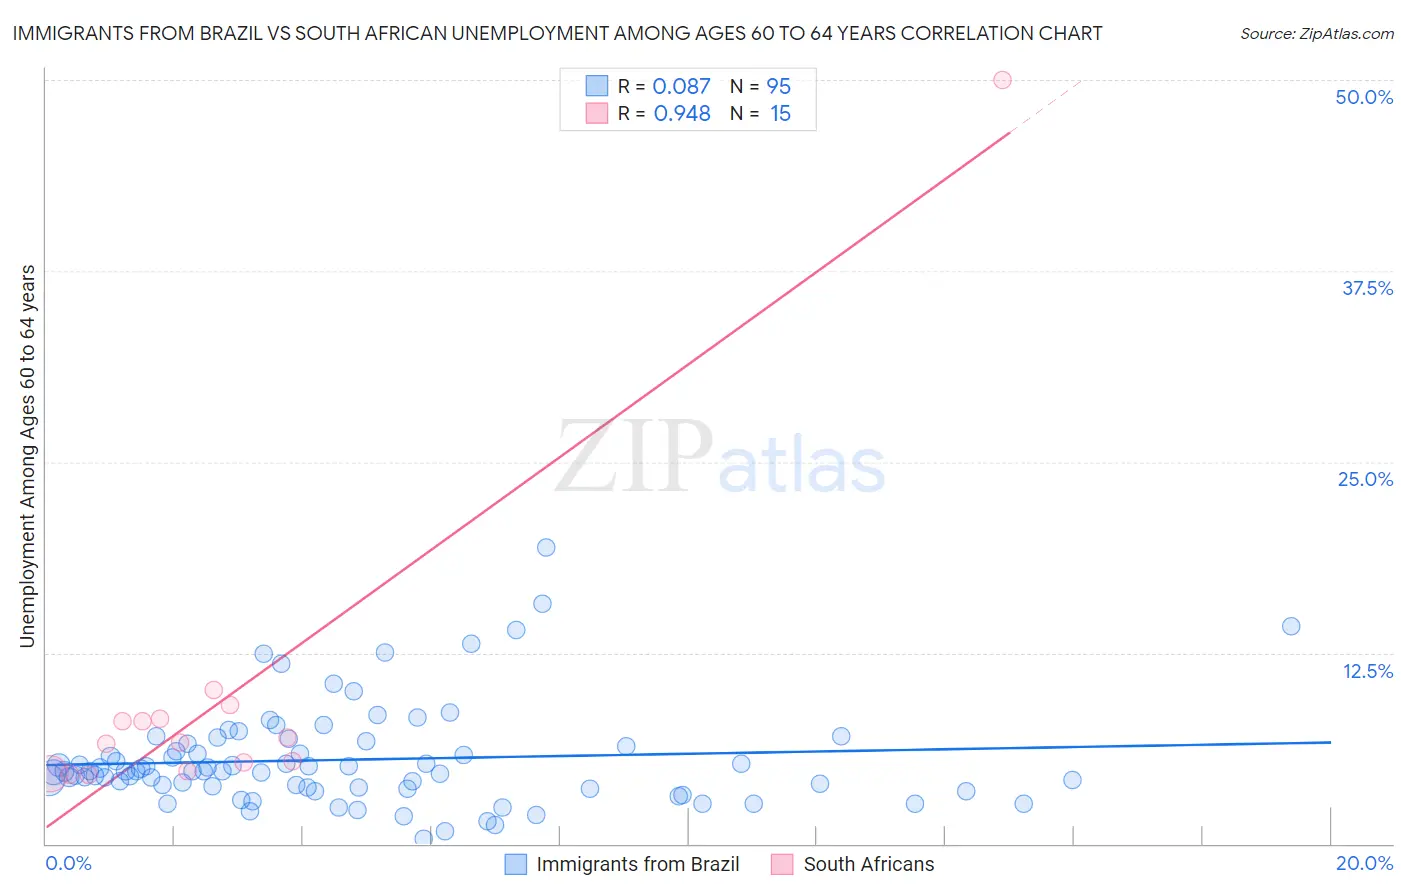 Immigrants from Brazil vs South African Unemployment Among Ages 60 to 64 years